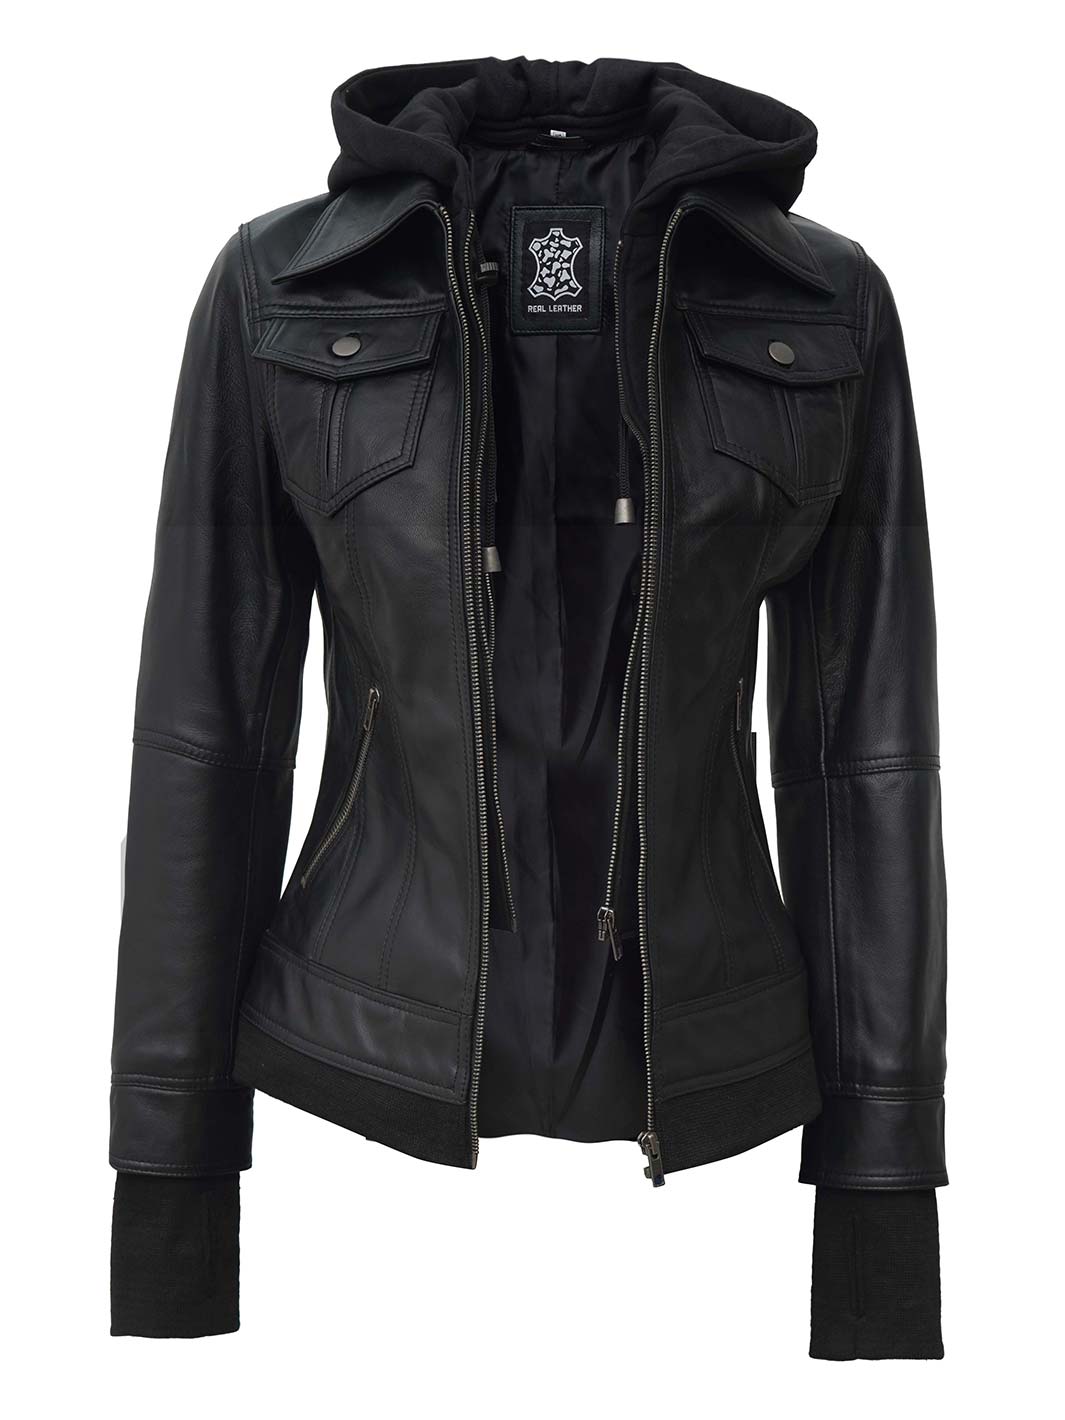 Tralee Black Hooded Leather Jacket Womens | Real Leather | Decrum